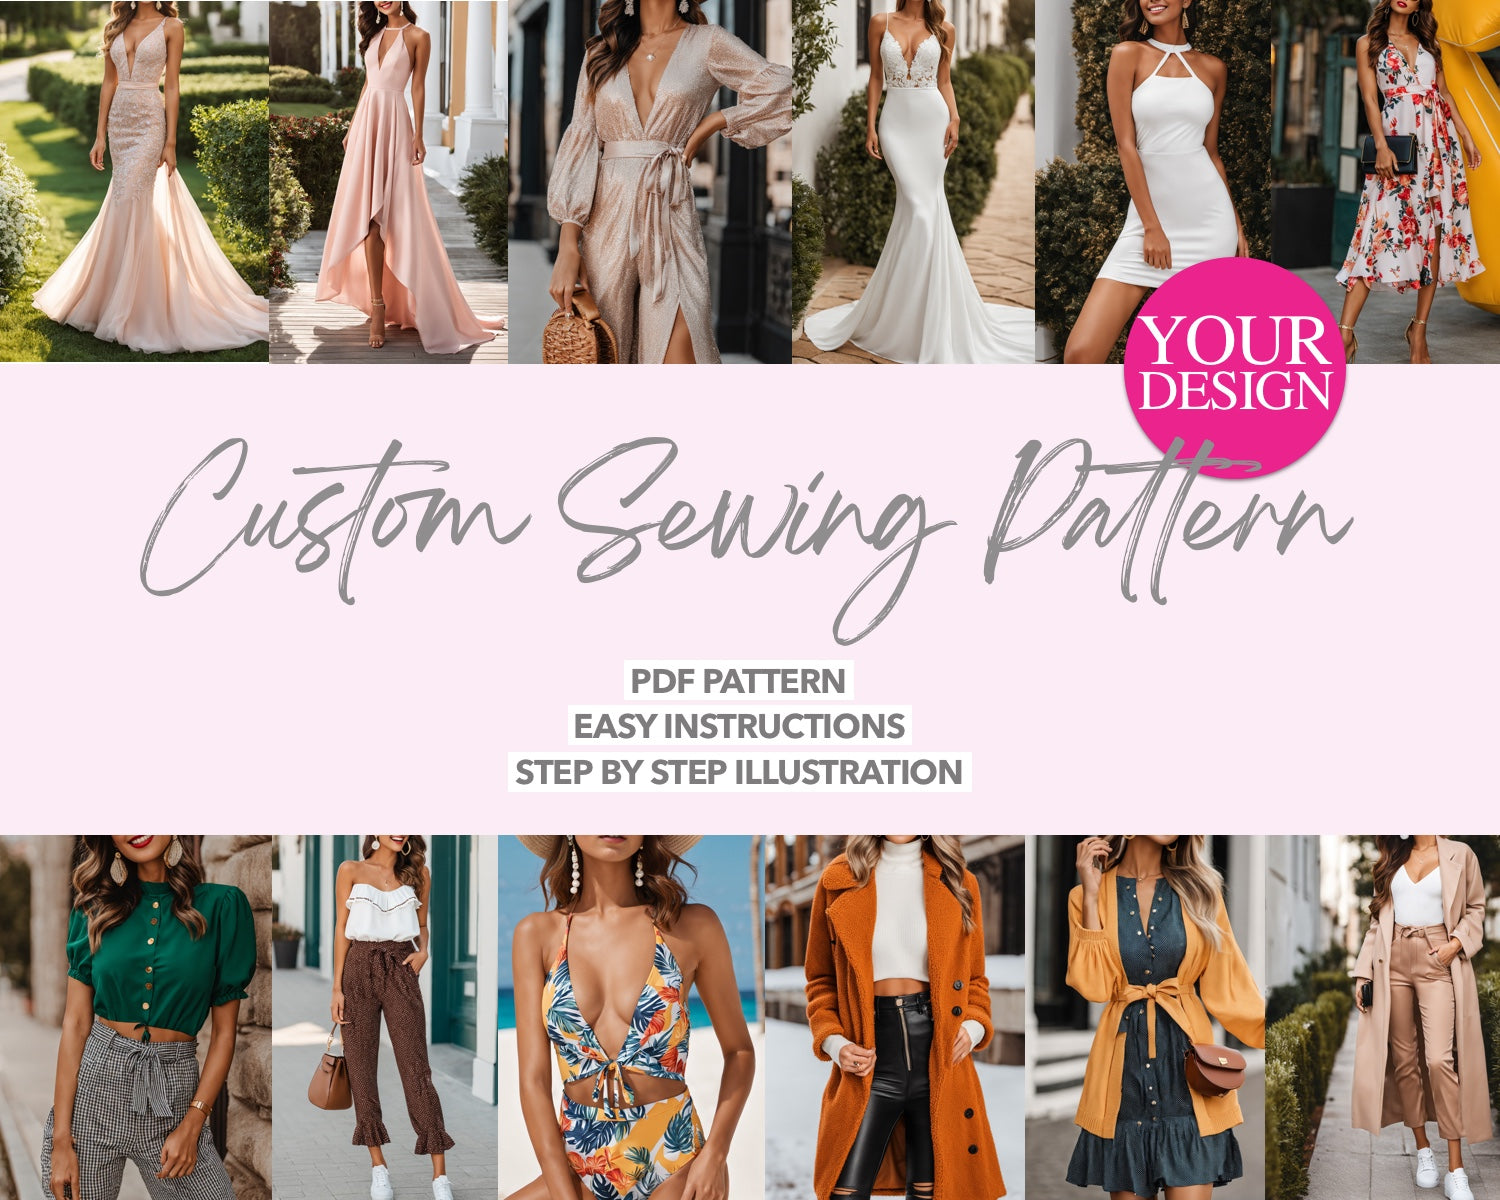 Custom Sewing Pattern pdf sewing pattern with easy instructions and step by step illustrations.